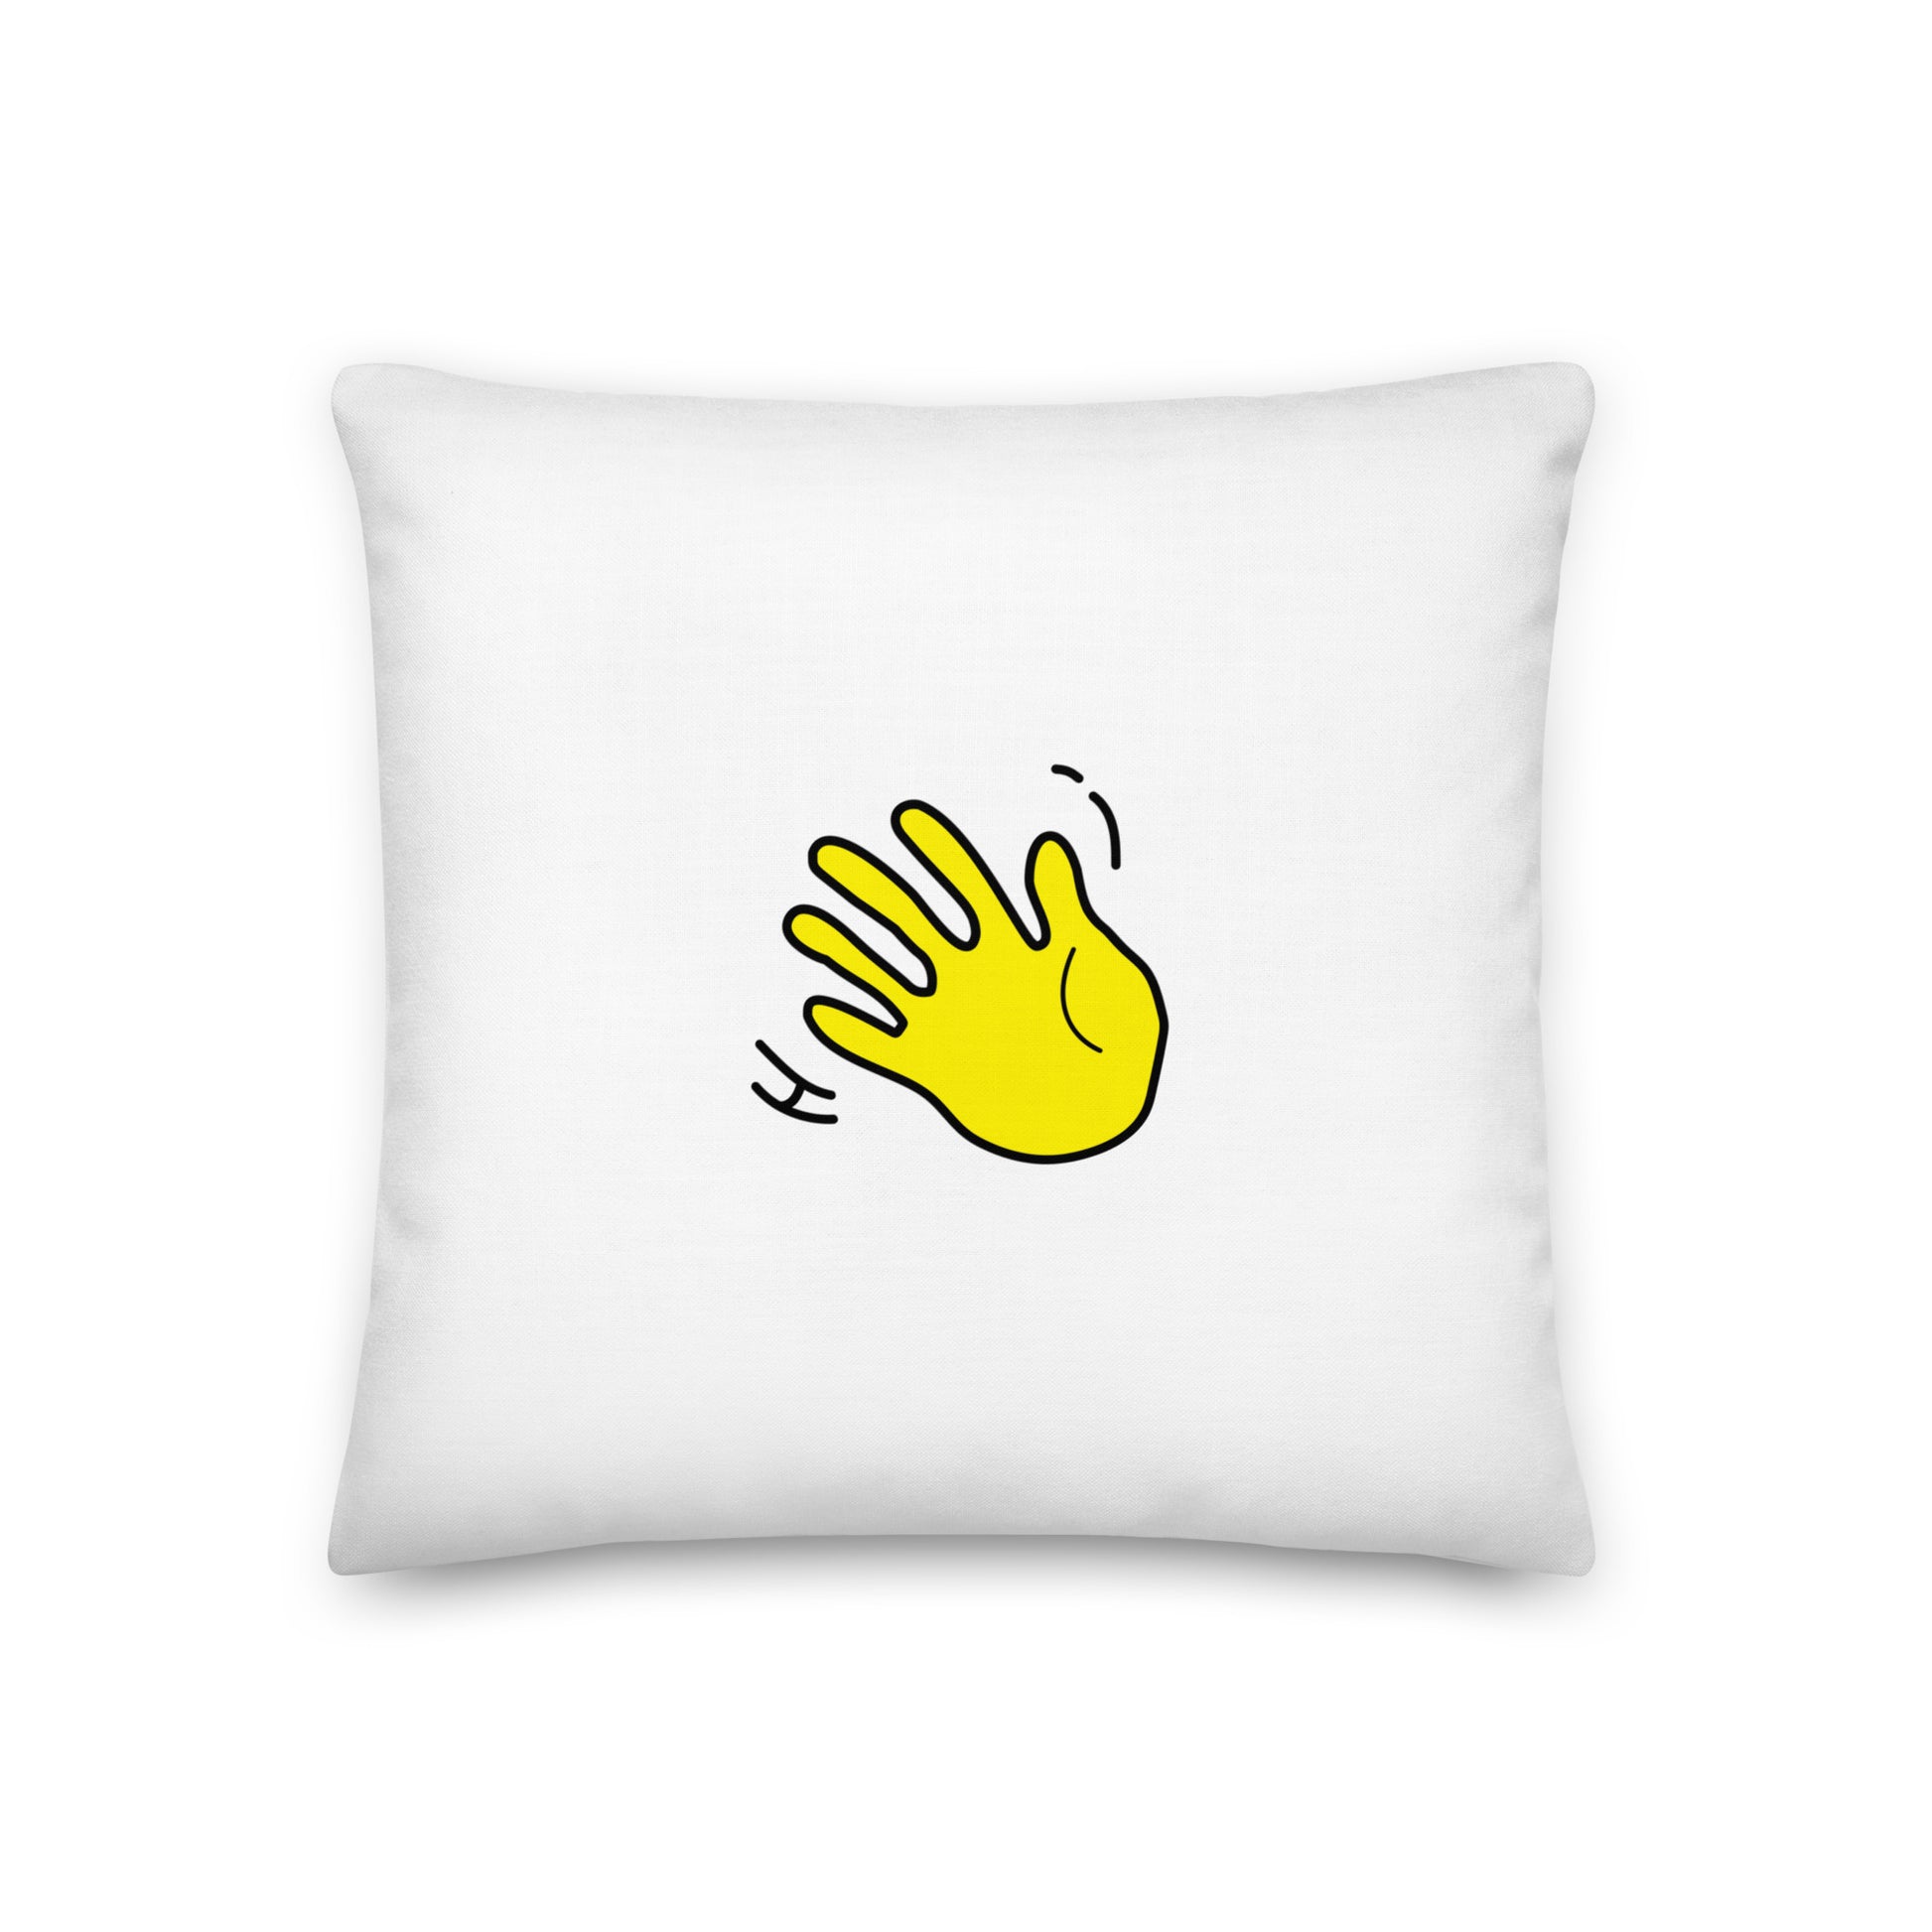 Hi Pillow in white with Hi emoji by HiJohnny.com